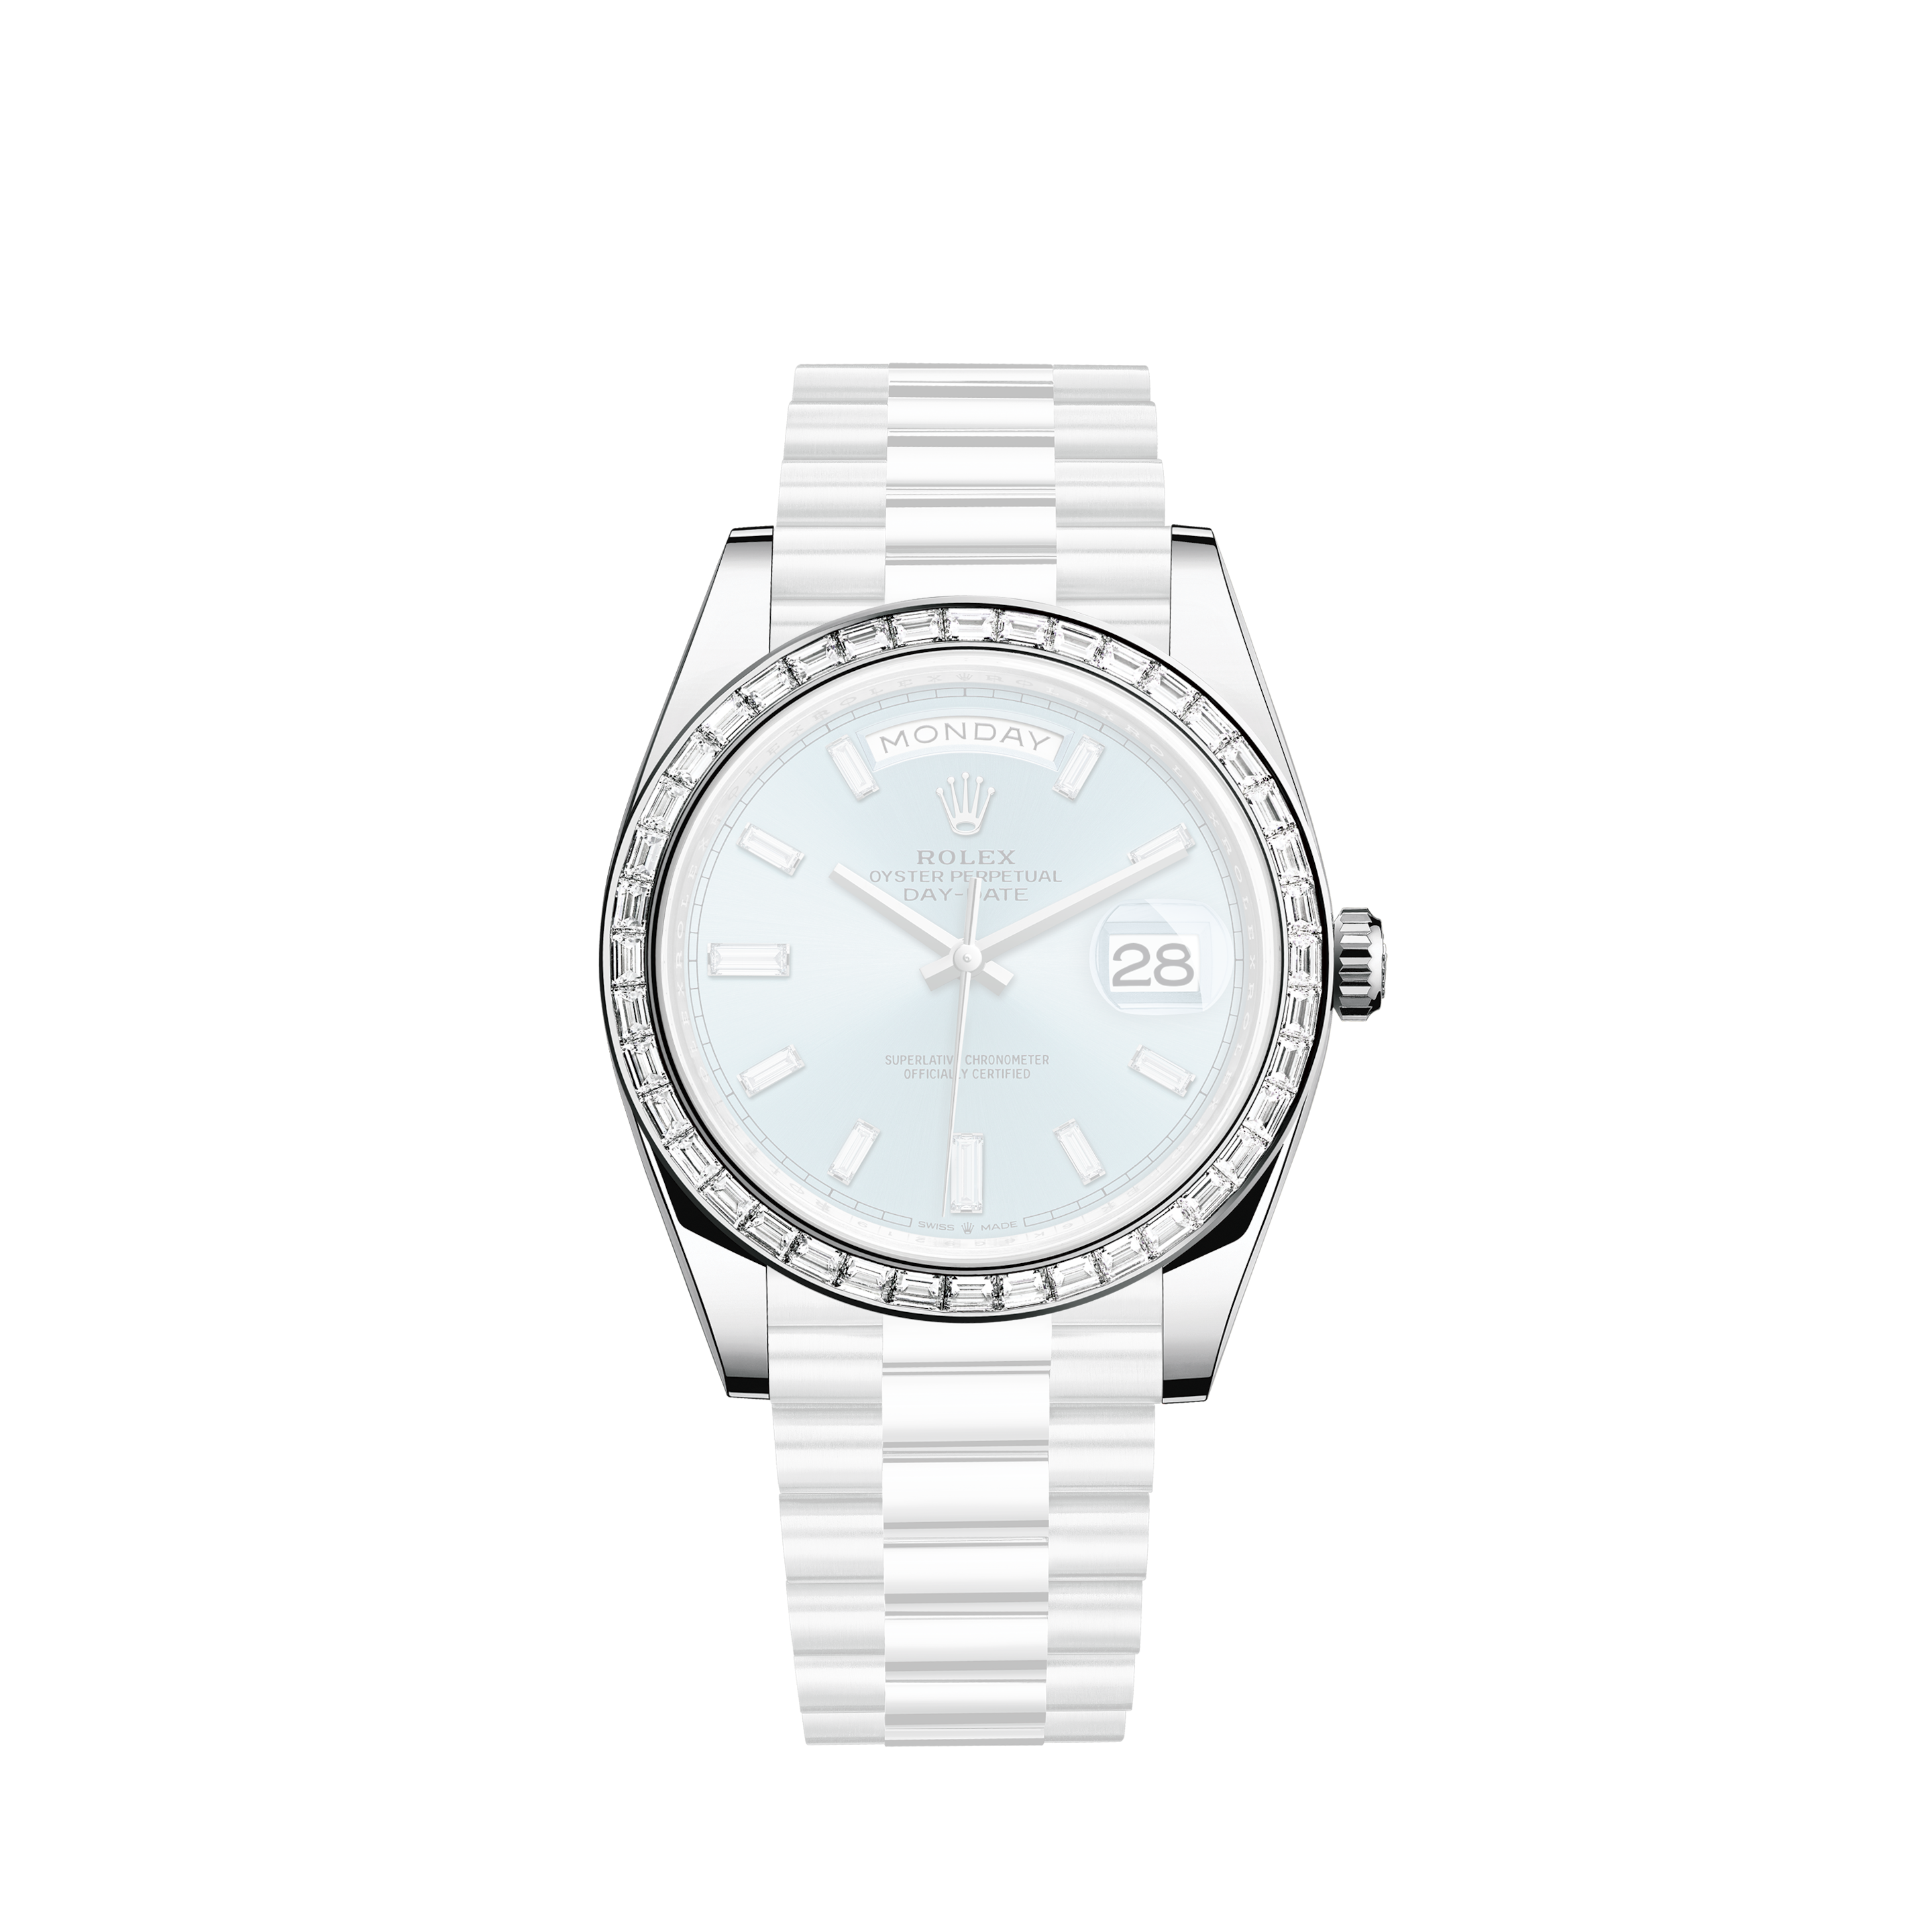 Rolex Datejust 36 Automatic Stainless Steel Men's Watch Oyster Perpetual Ref. 126200 B&P